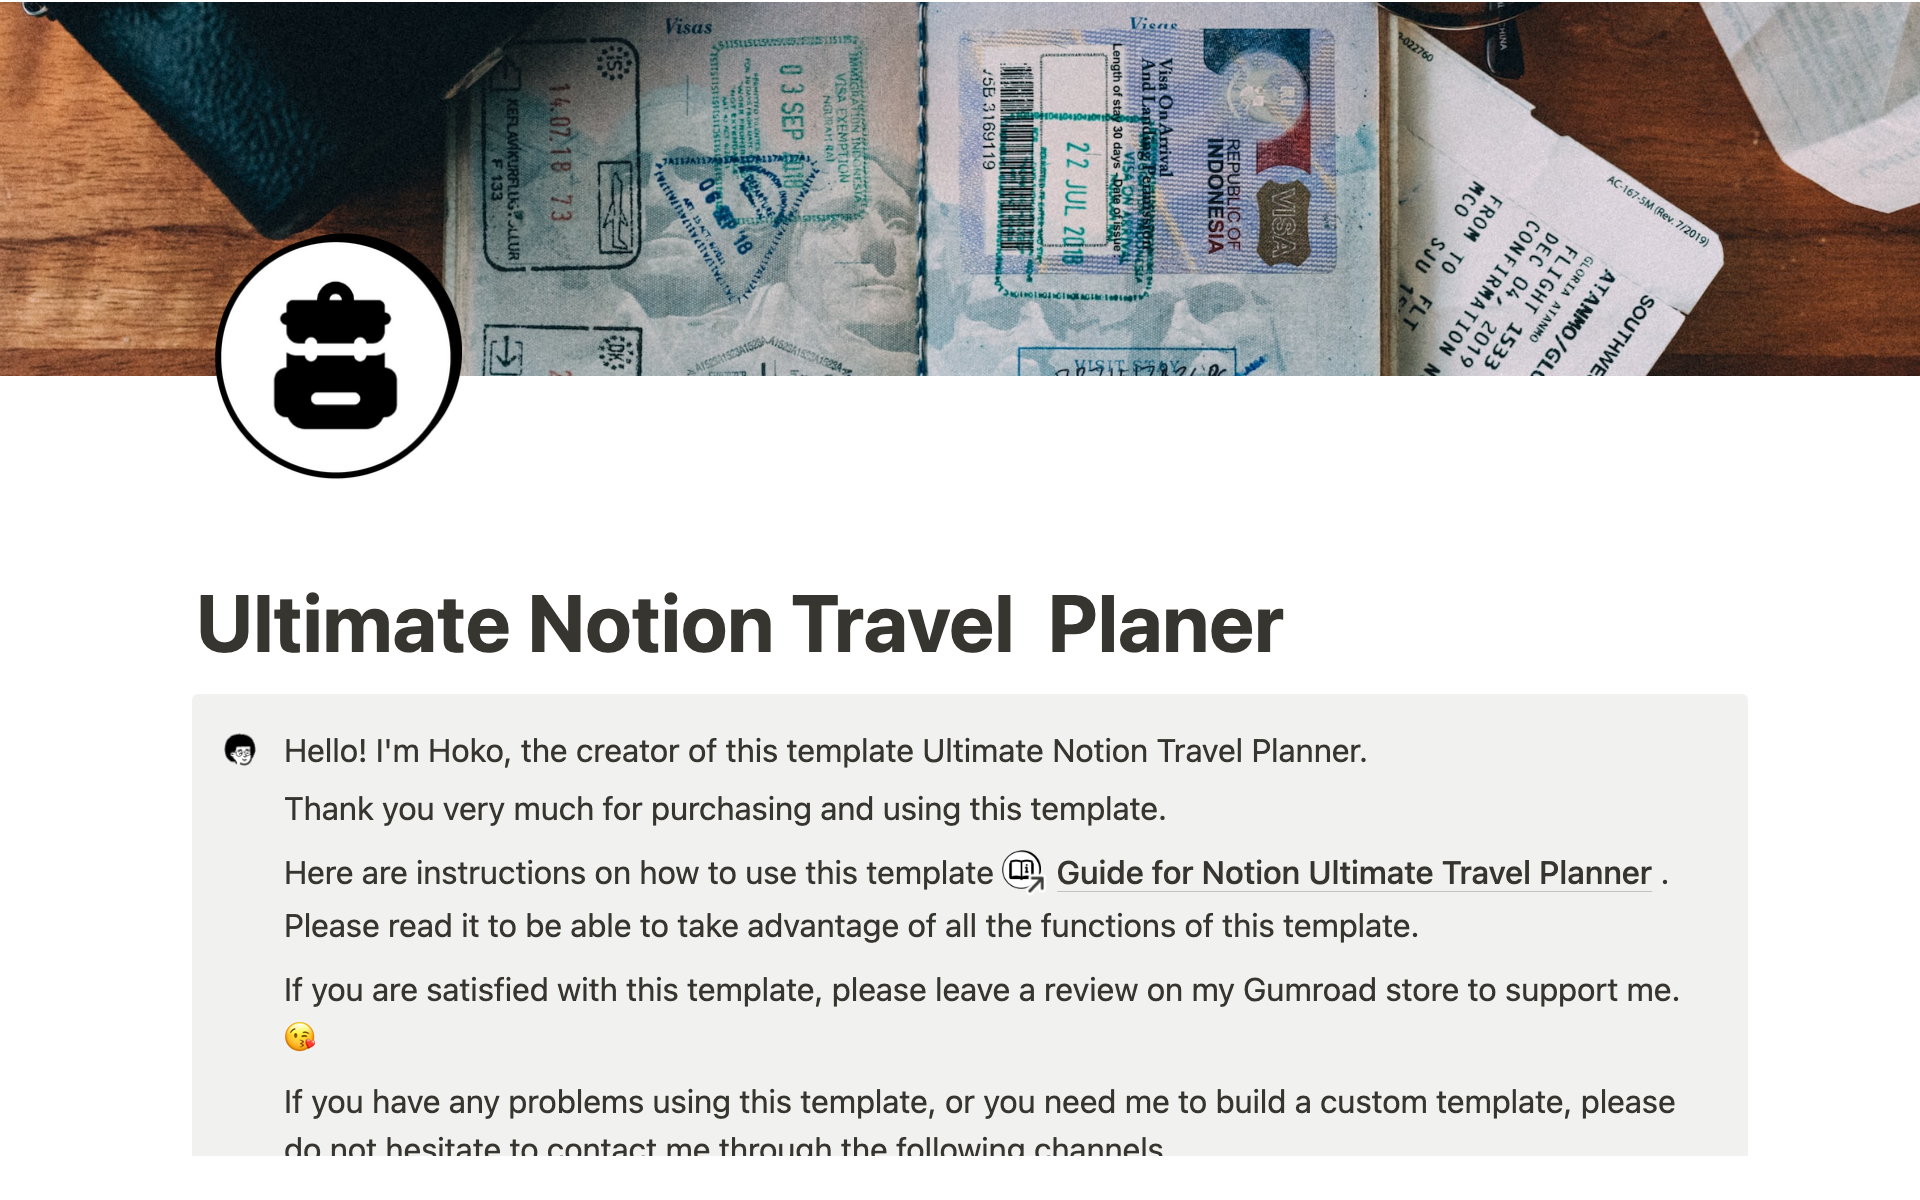 With the Ultimate Notion Travel Planner, you can easily map out your route, research destinations, book accommodations, and monitor your expenses in a matter of minutes.